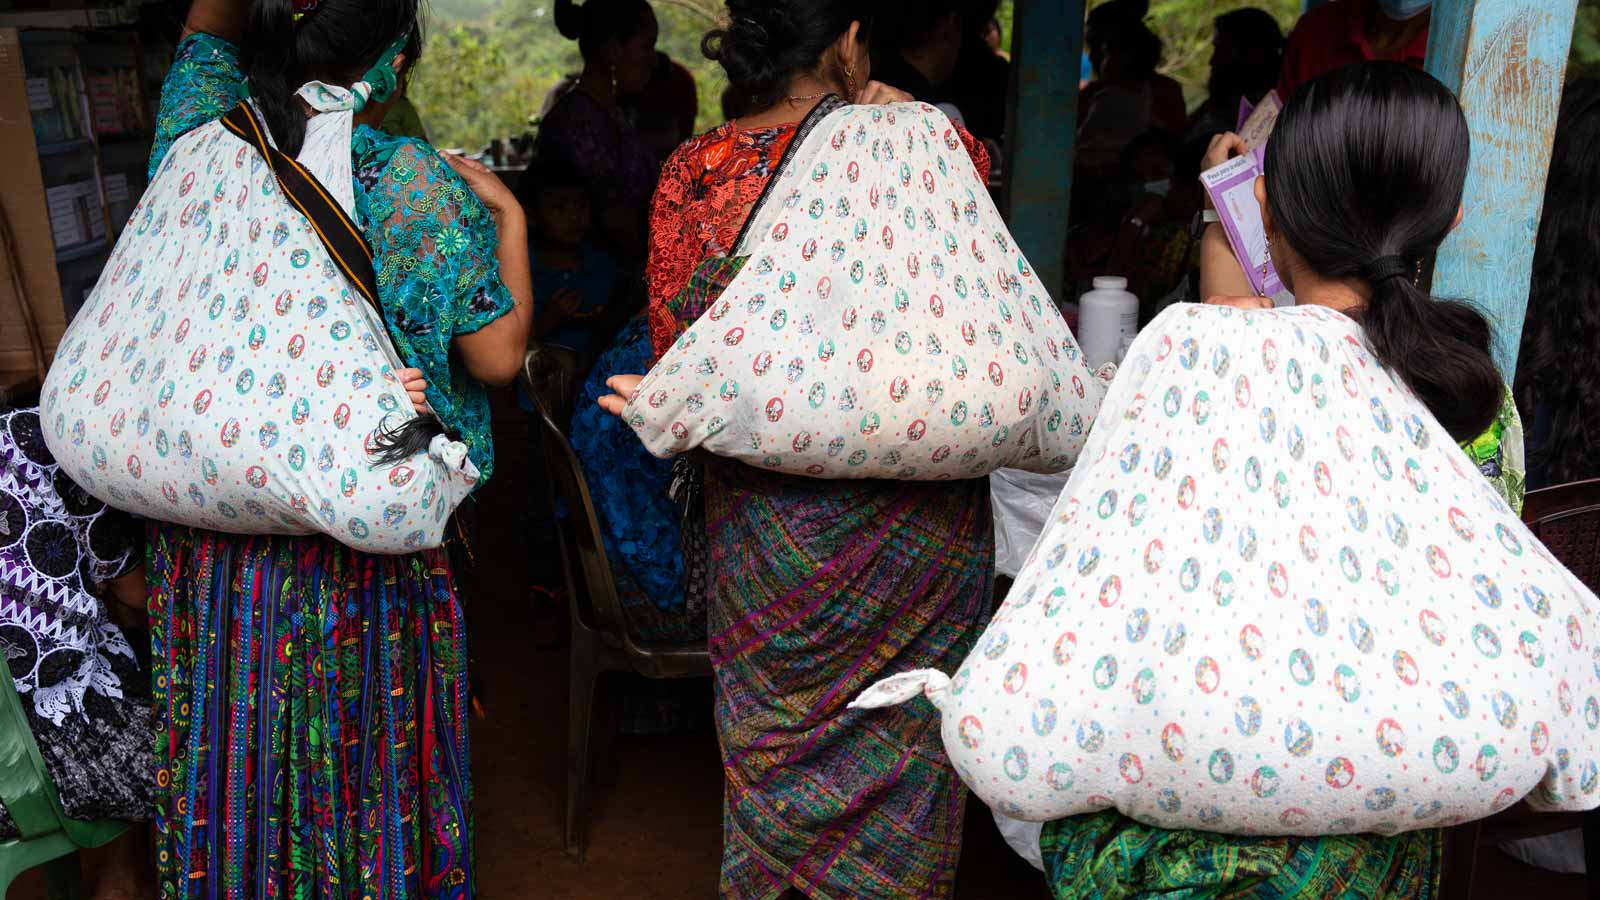 Mothers waiting for health services in the Manzana community